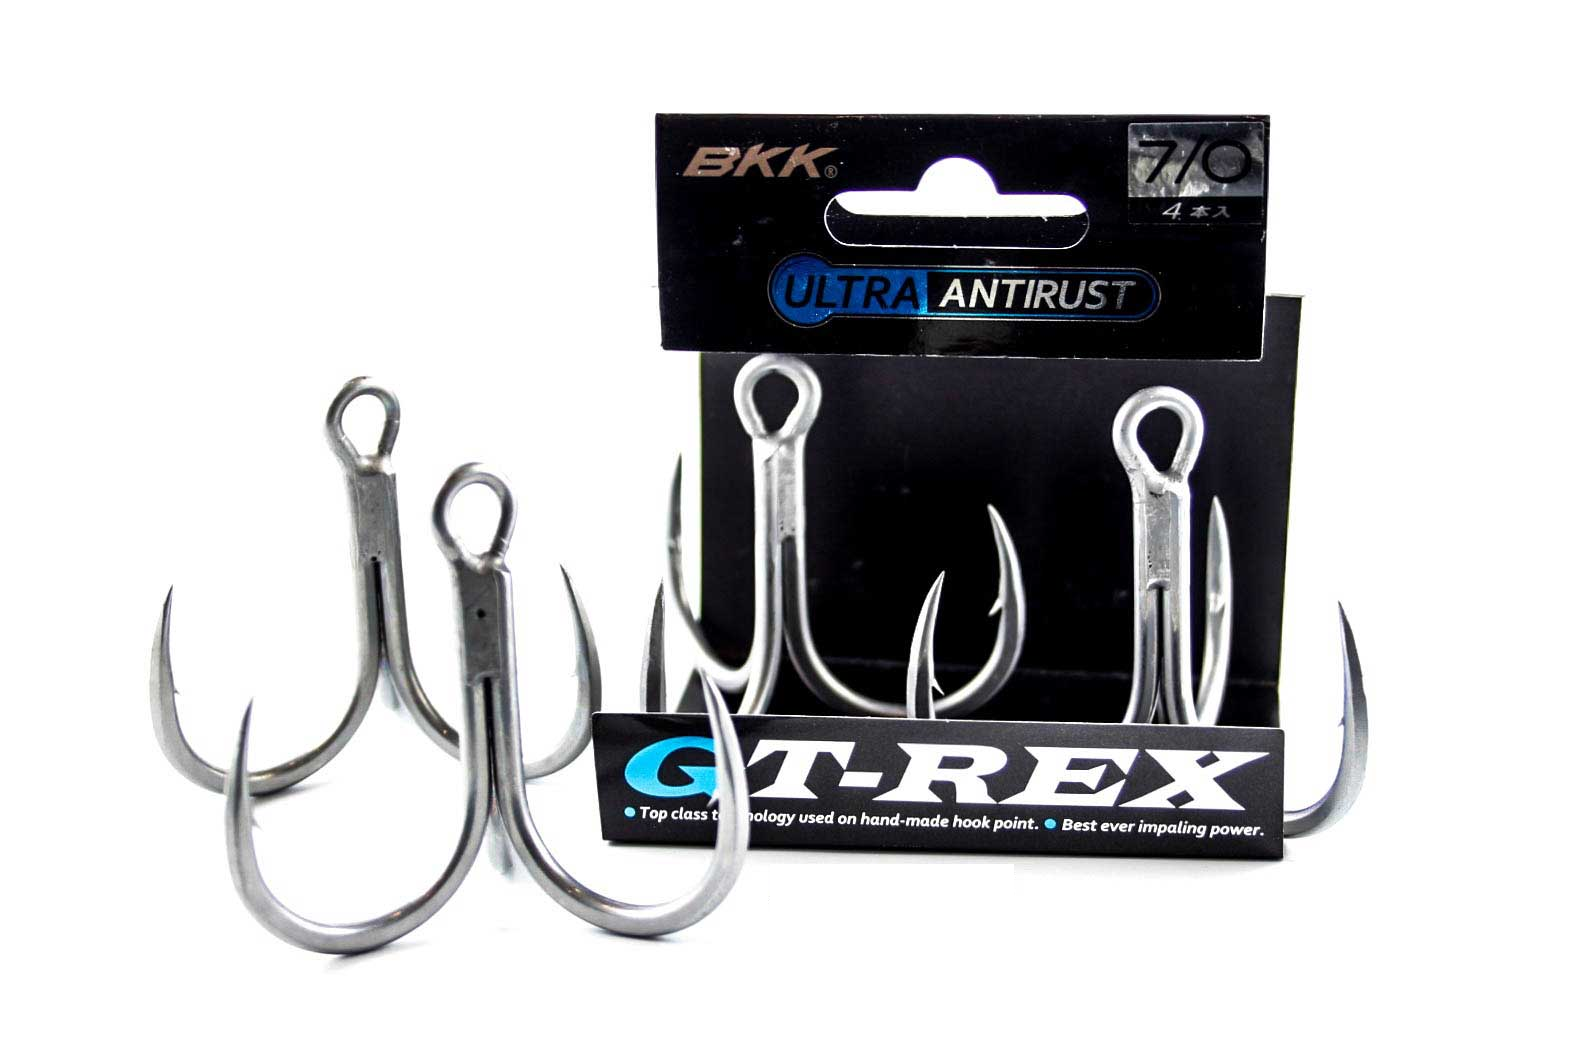 bkk fishing hook, bkk fishing hook Suppliers and Manufacturers at